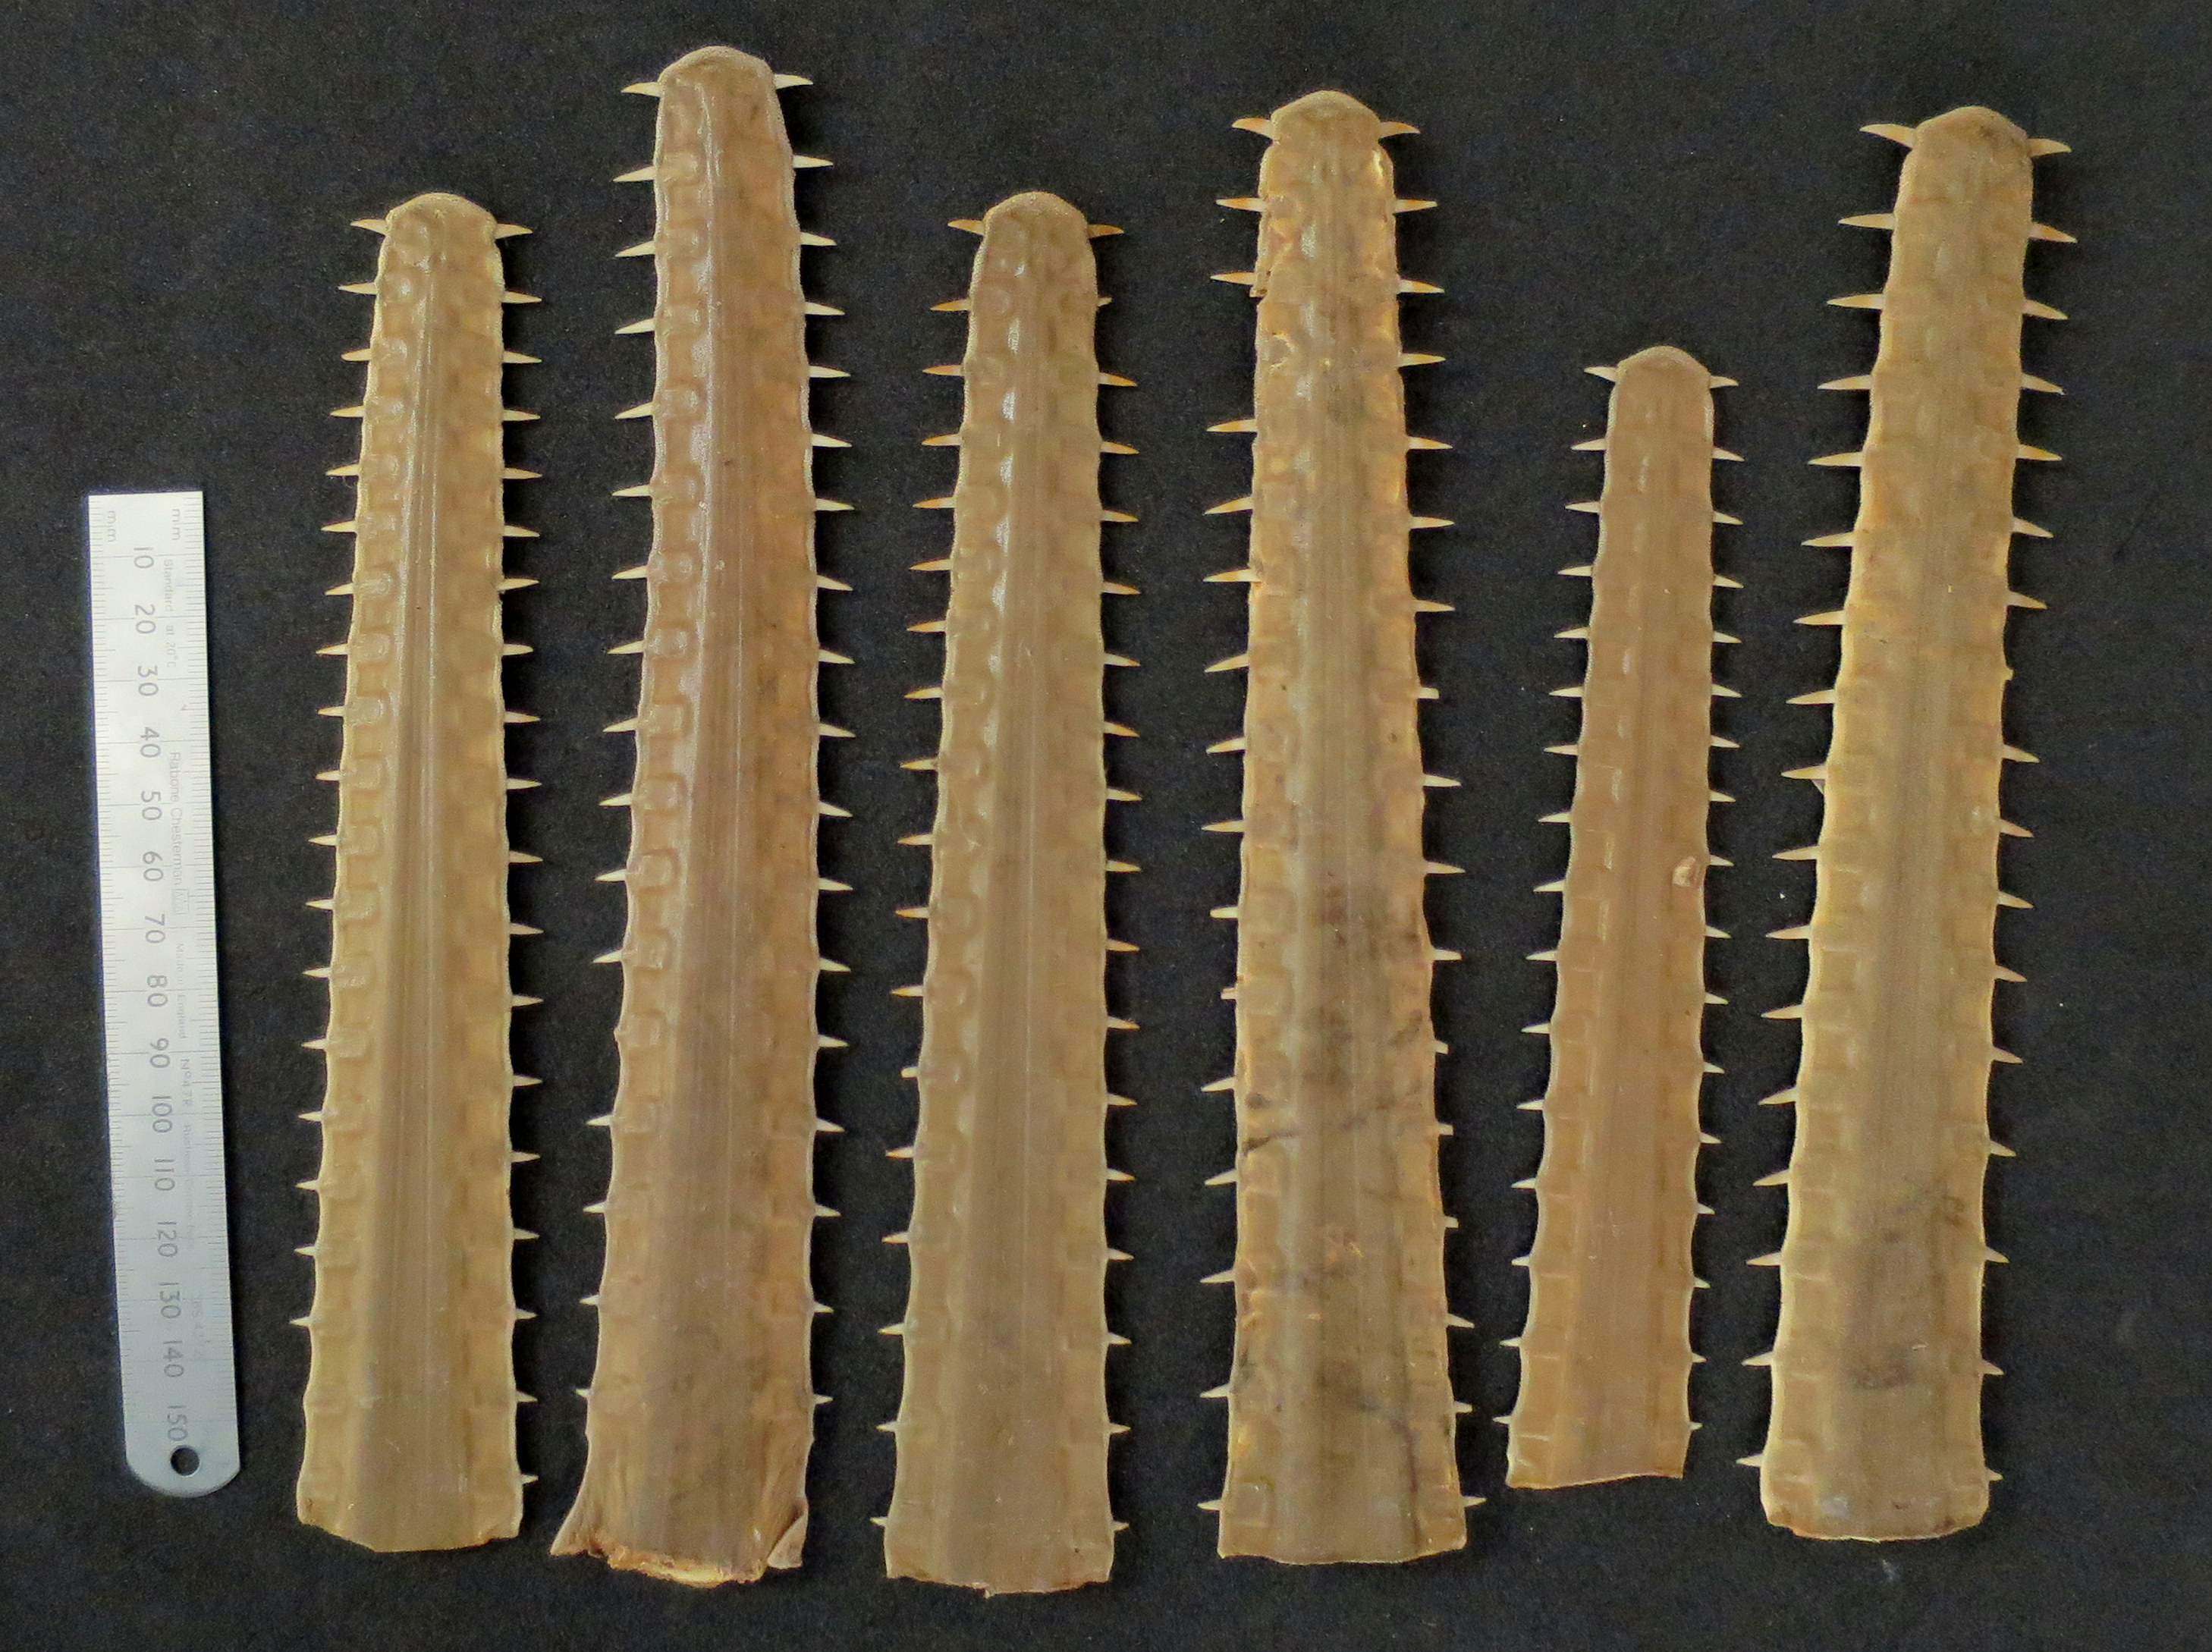 A handful of saws from young largetooth sawfish Pristis pristis collected from The Gambia River in 1974. 